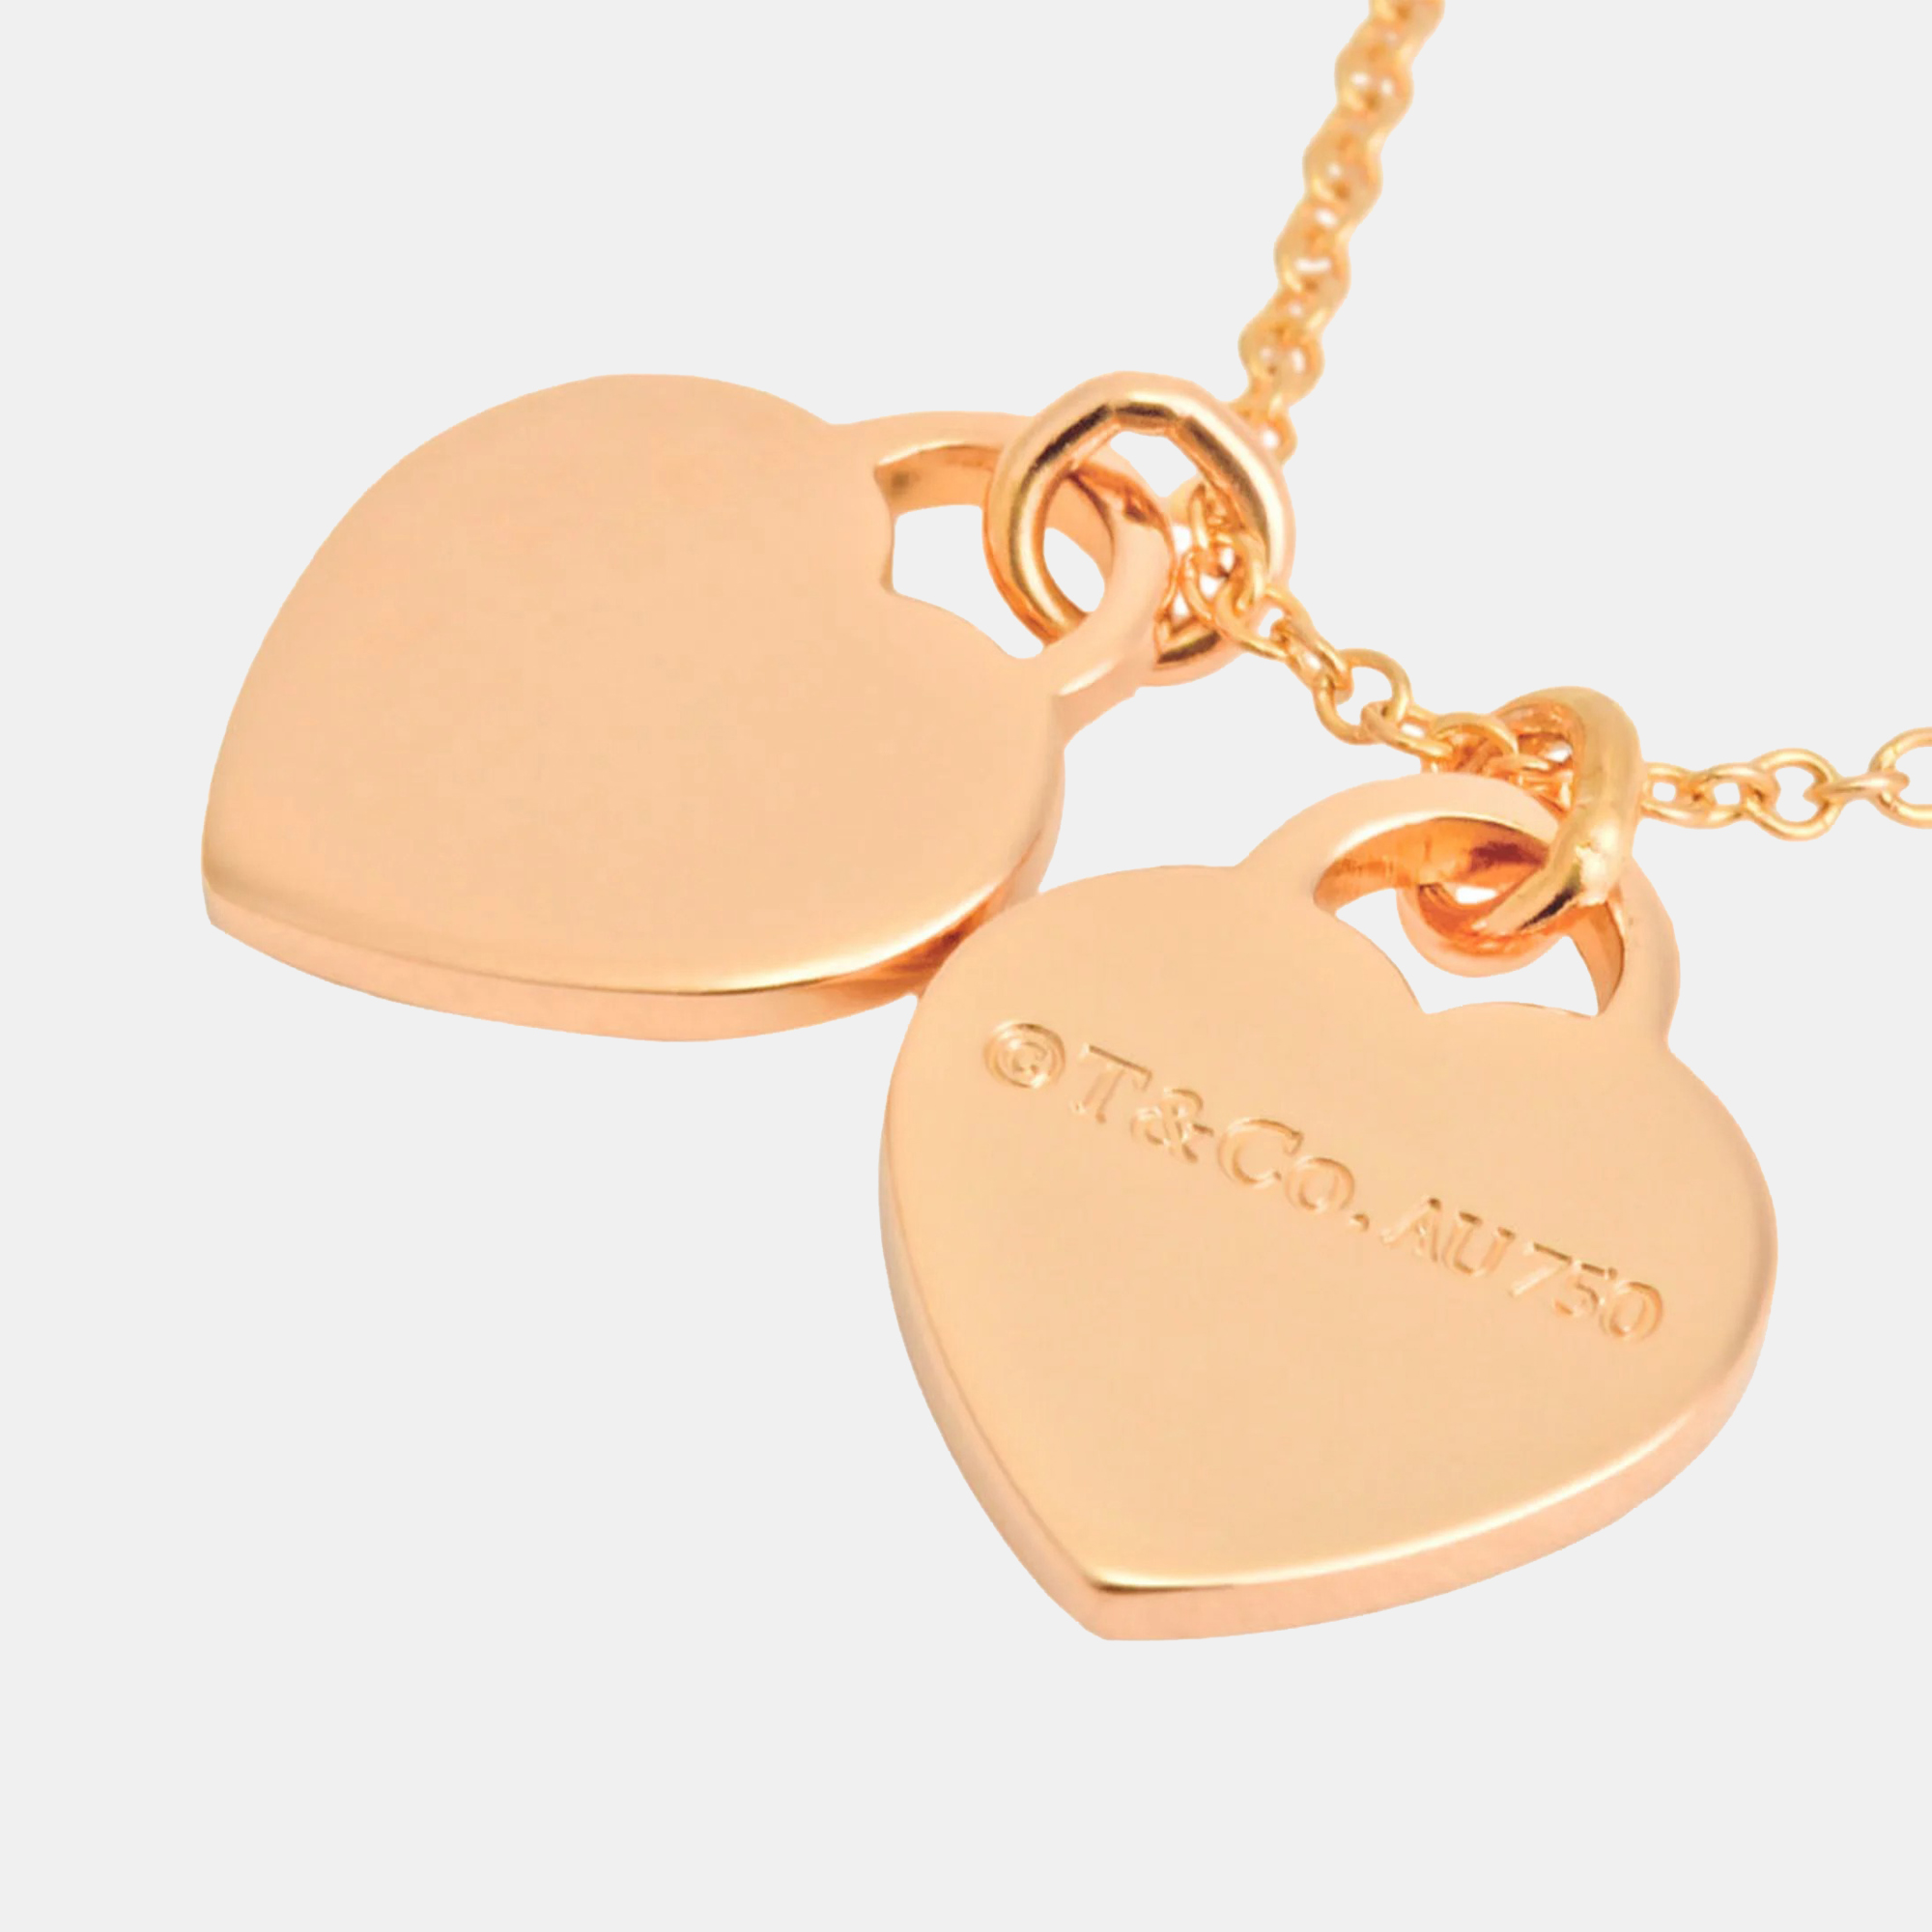 Tiffany & Co. 18K Rose Gold Return To Tiffany Love Double Heart Tag Pendant Necklace